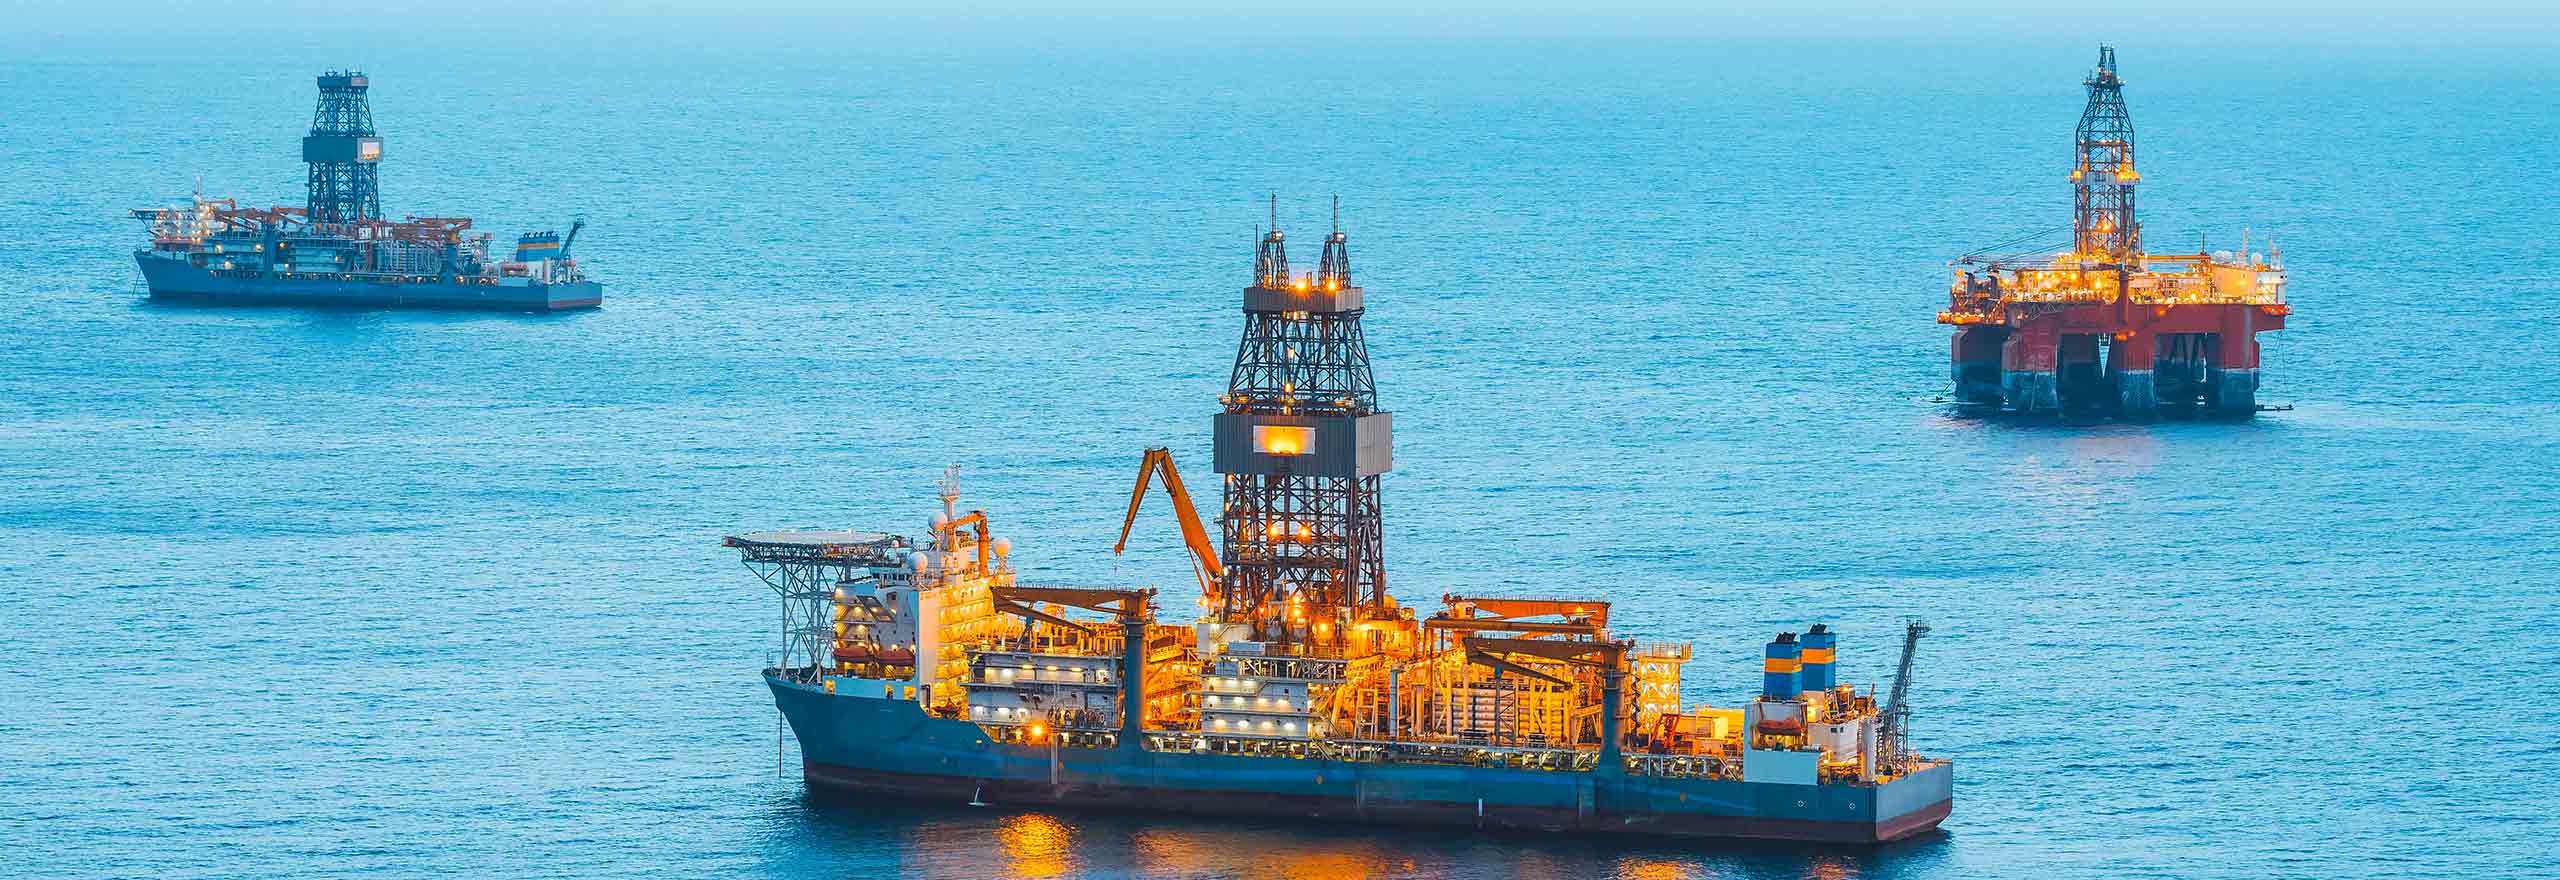 Offshore facilities using Hexagon's solutions